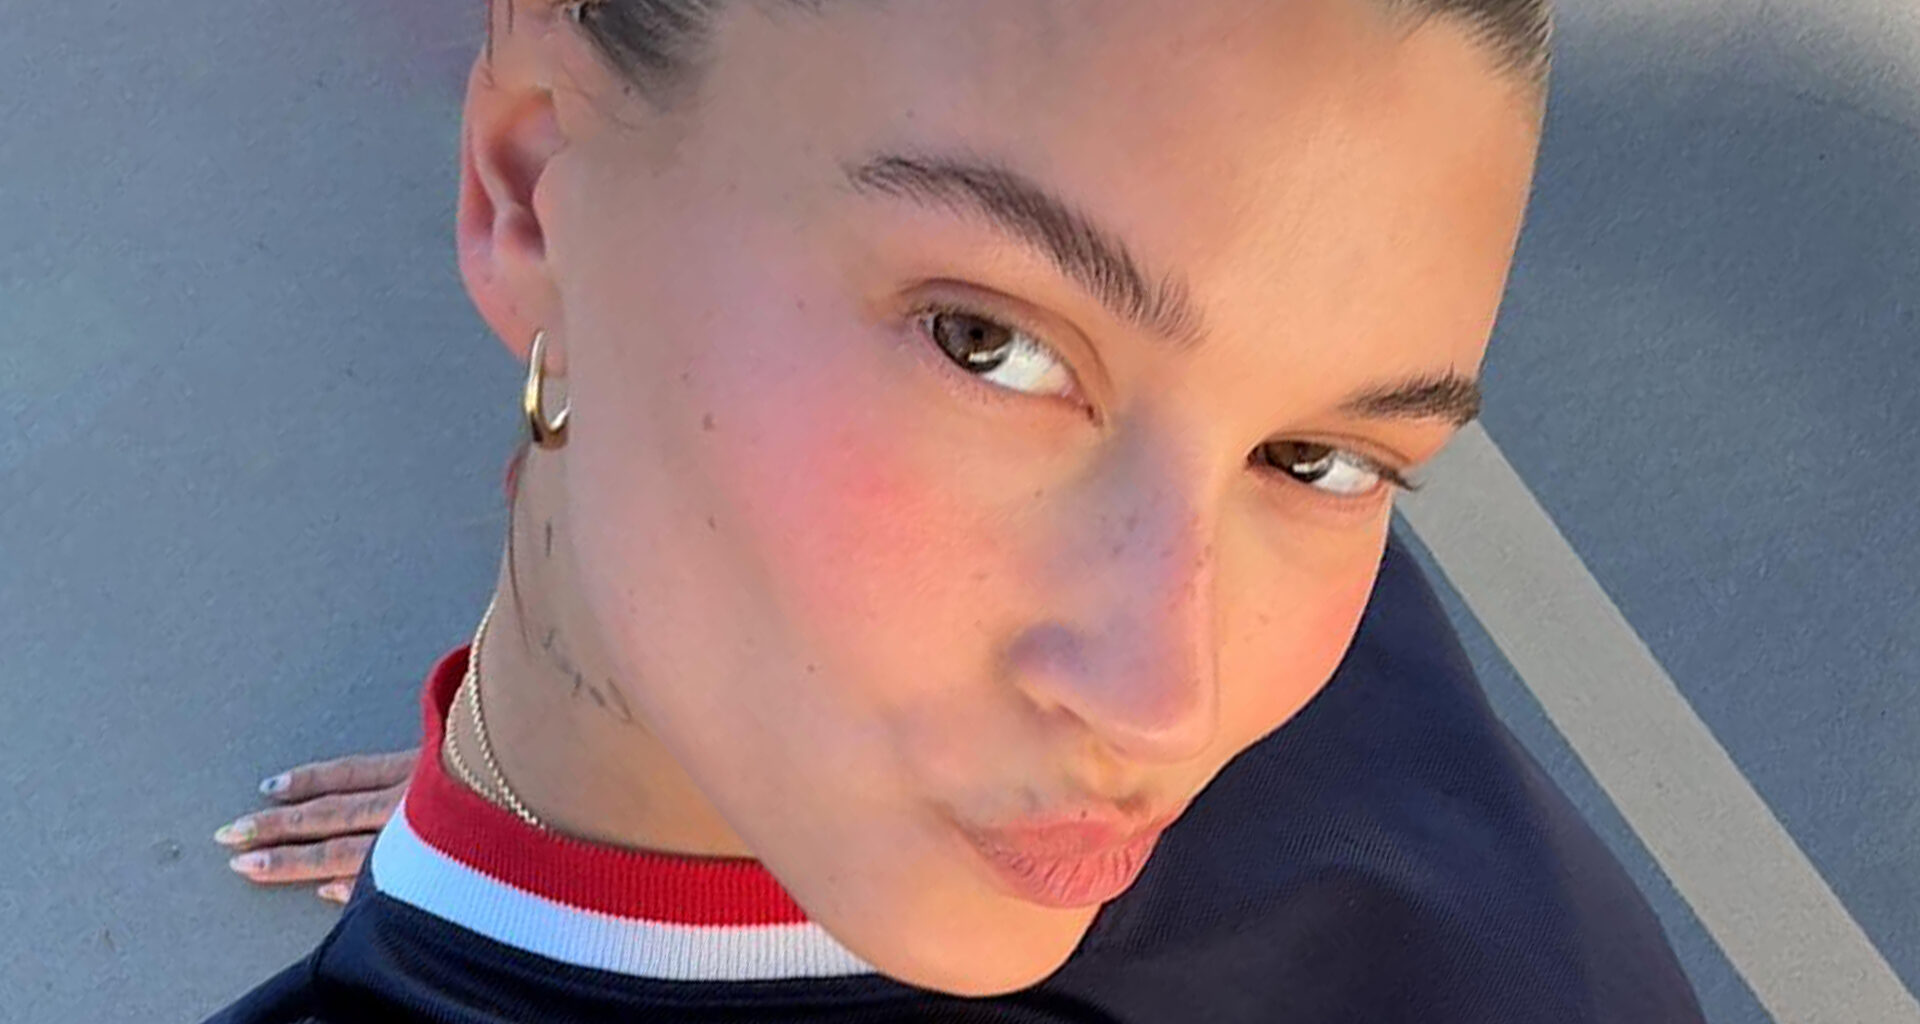 Hailey Bieber’s bare baby bump pokes out of crop top in new photo as fans ask ‘where’s Justin’ as he’s ‘always absent’